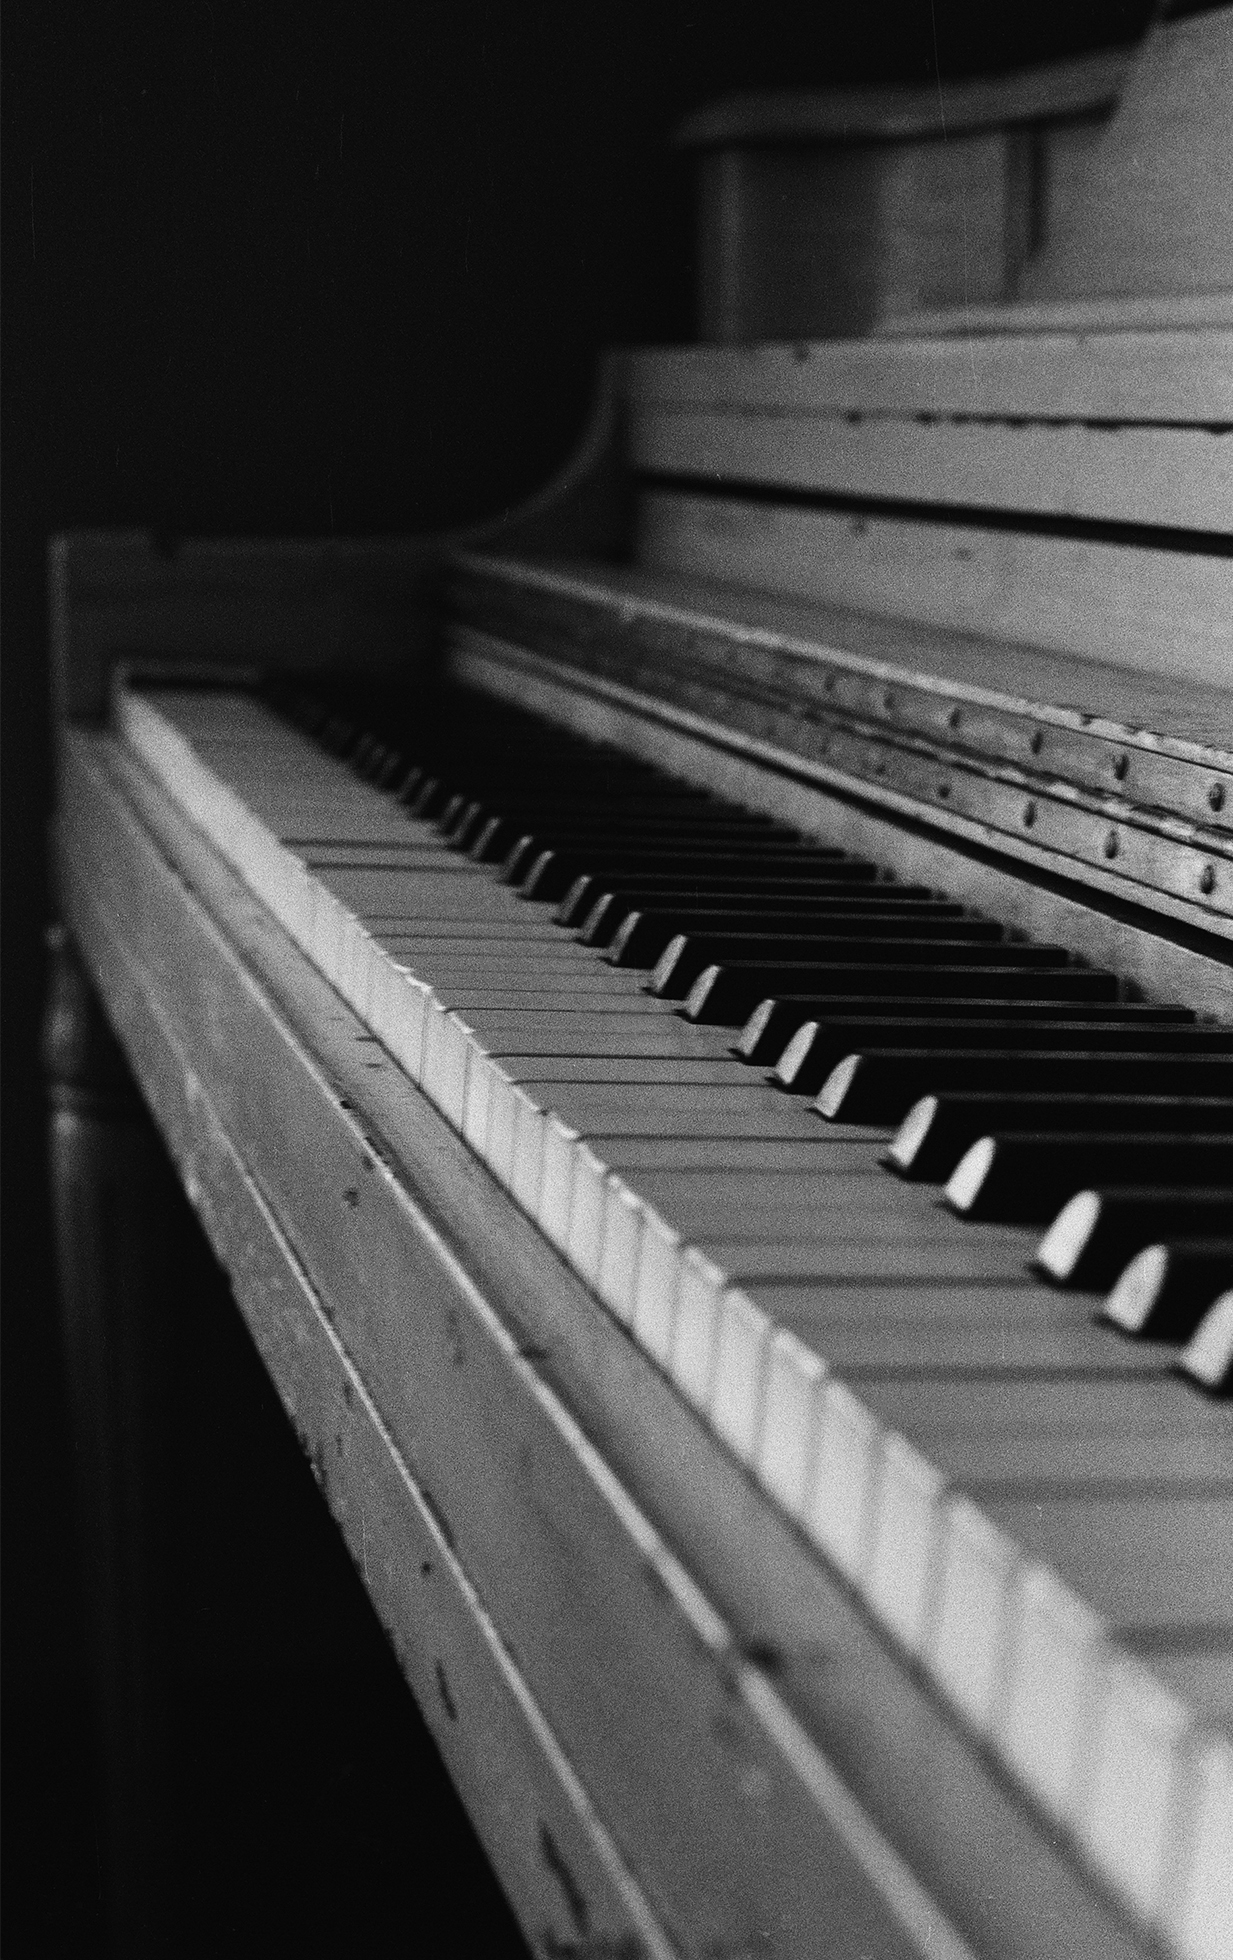 A close-up of the keys on an upright piano. The piano has some chips and dents in its wood.